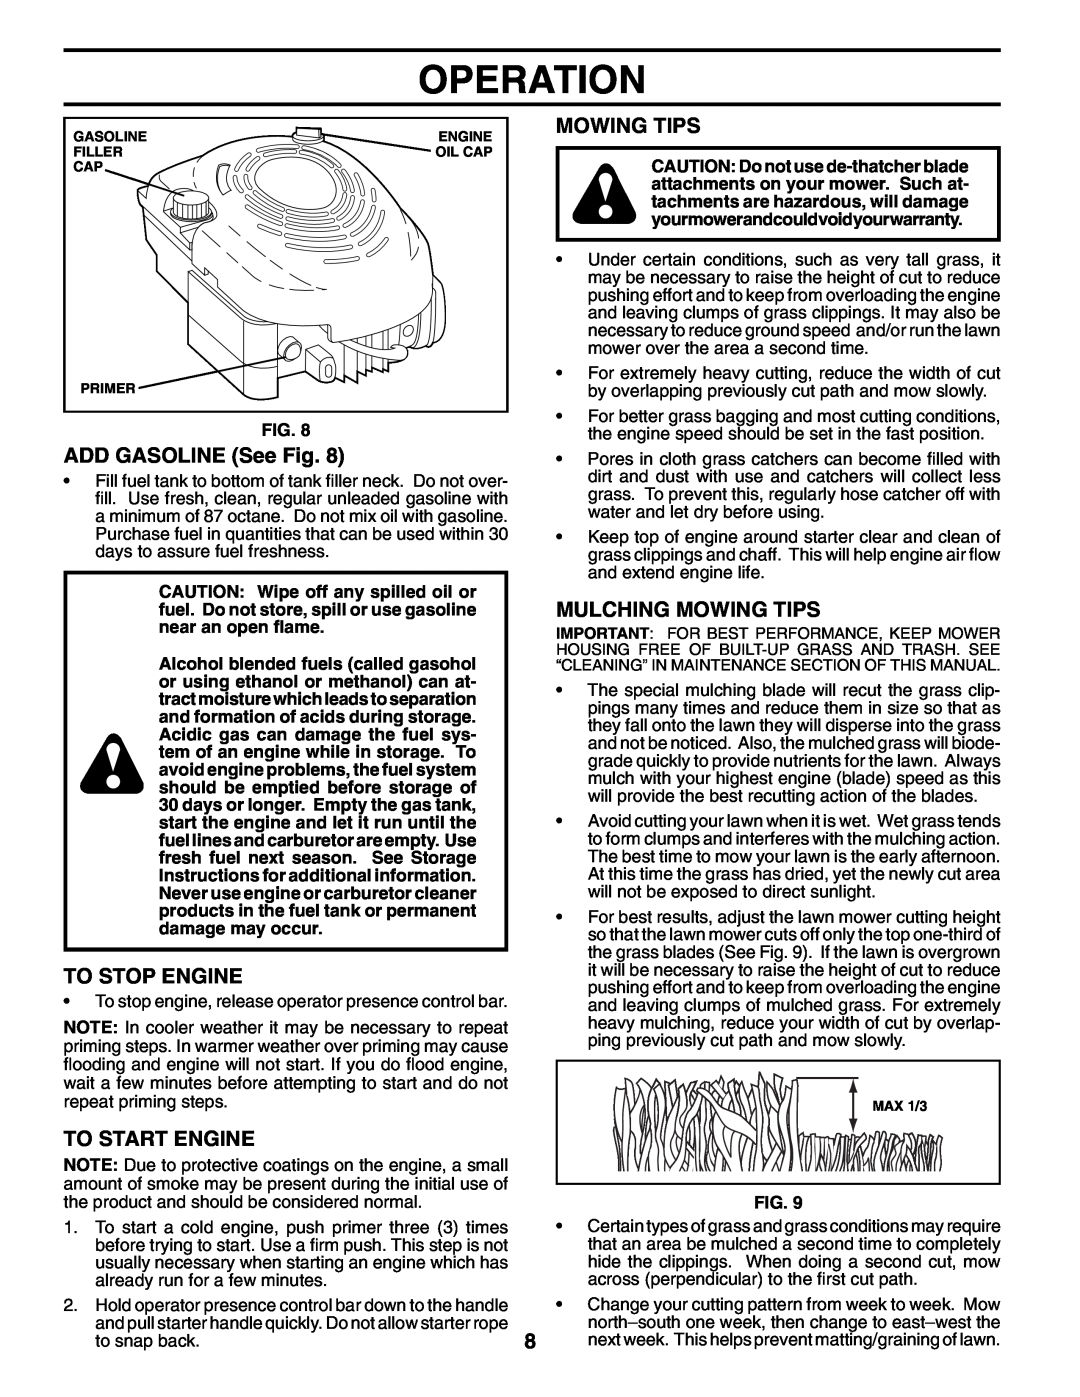 Husqvarna 65021CHV owner manual ADD GASOLINE See Fig, To Stop Engine, To Start Engine, Mulching Mowing Tips, Operation 